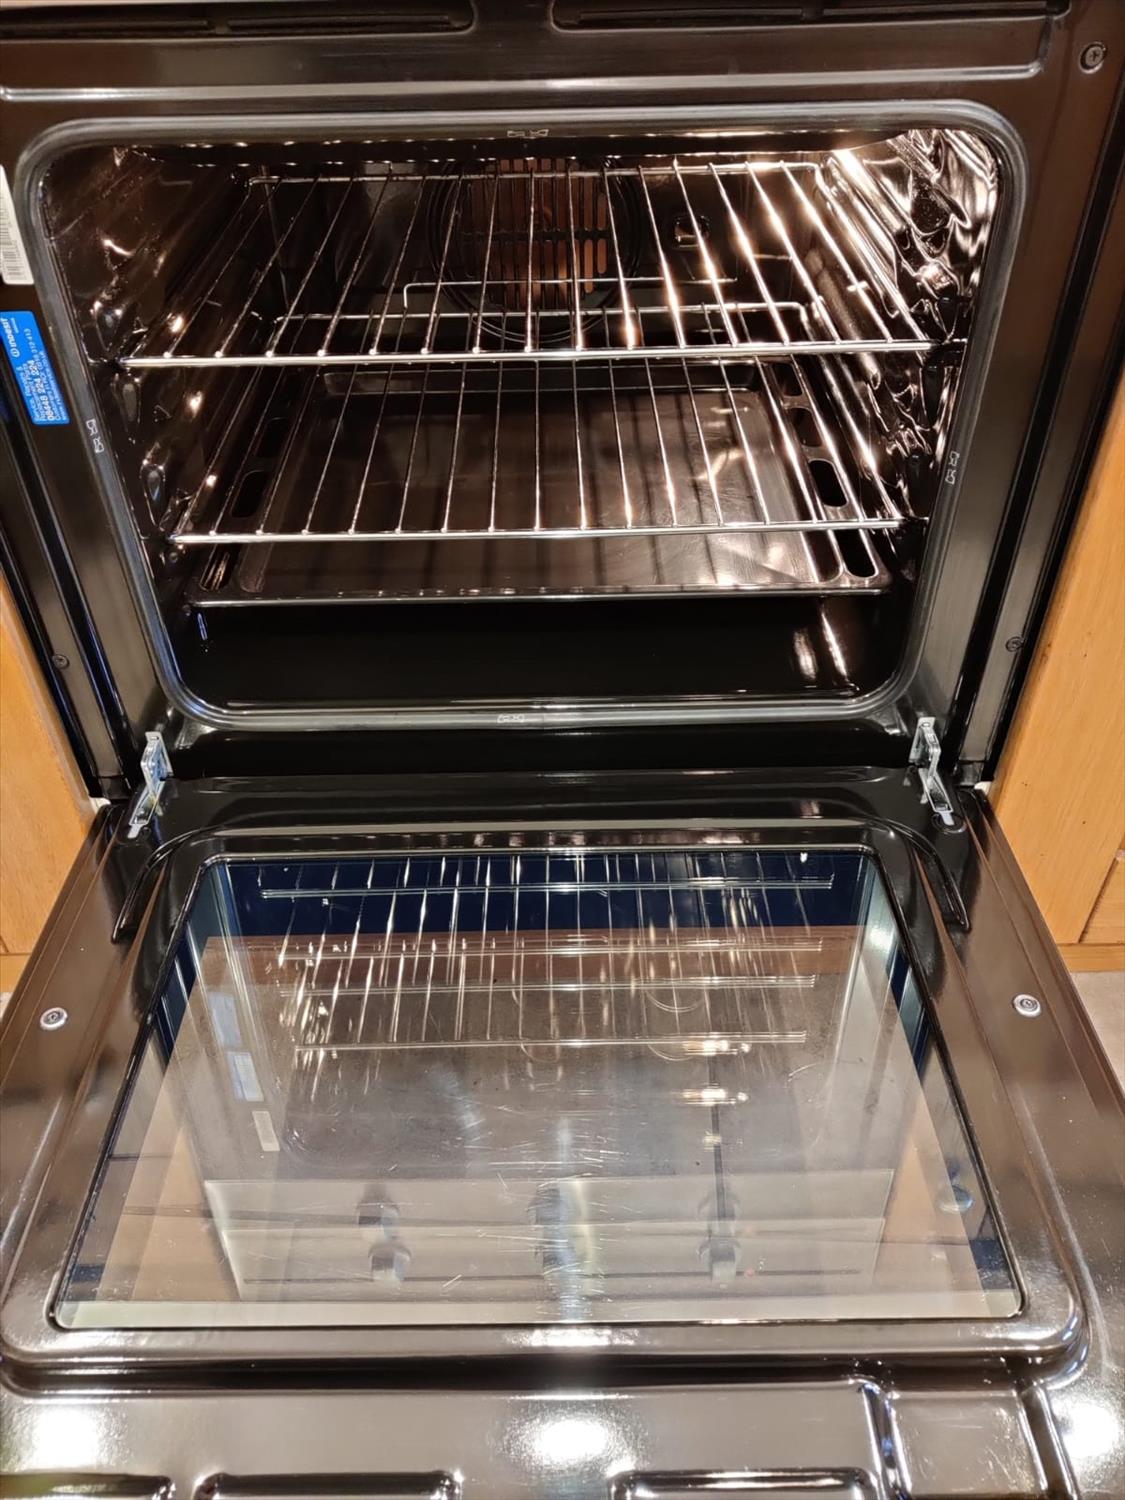 Oven spotlessly clean